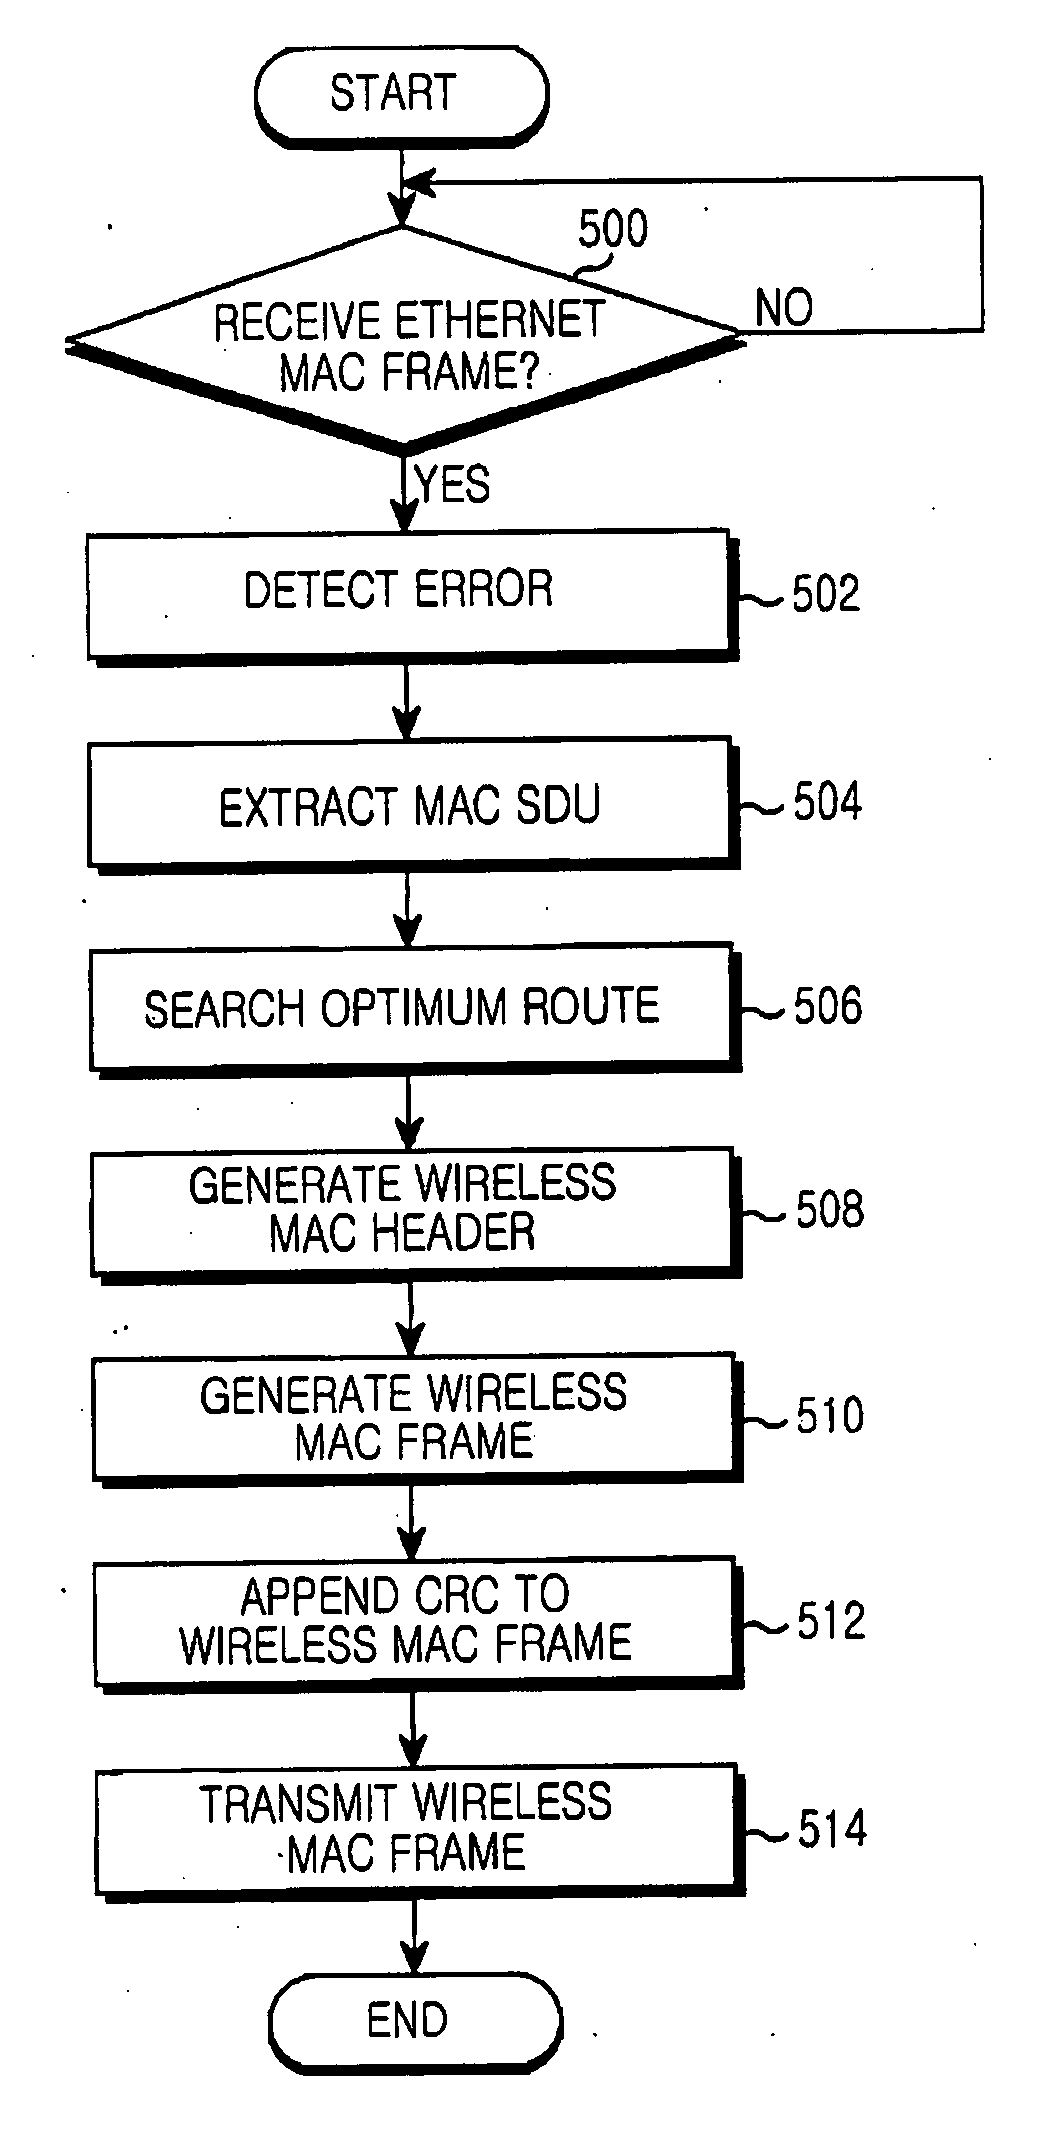 Apparatus and method for converting MAC frame in broadband wireless access (BWA) system